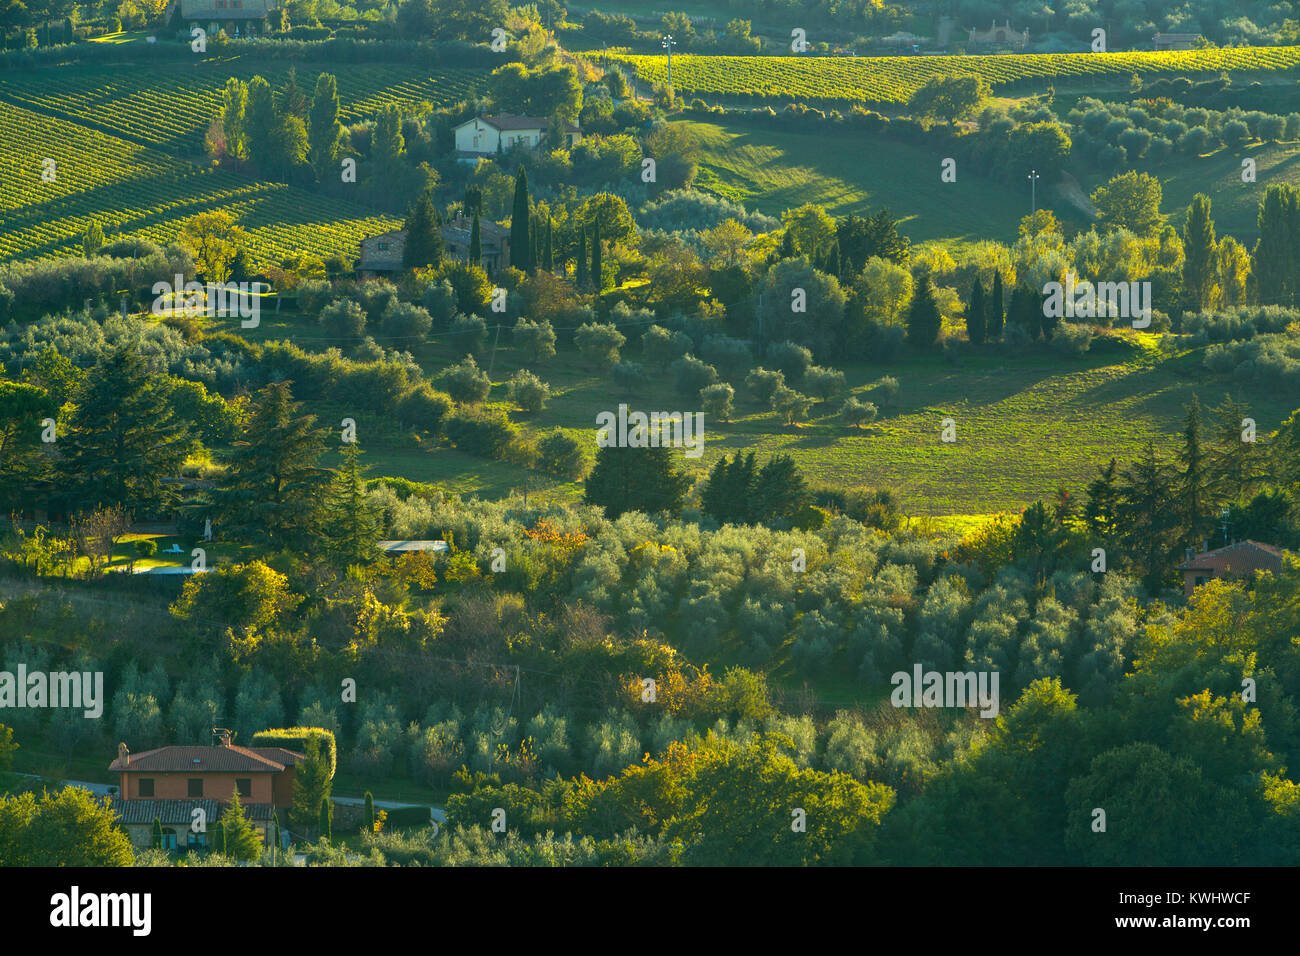 A country scene near the town of Montepulciano. Stock Photo